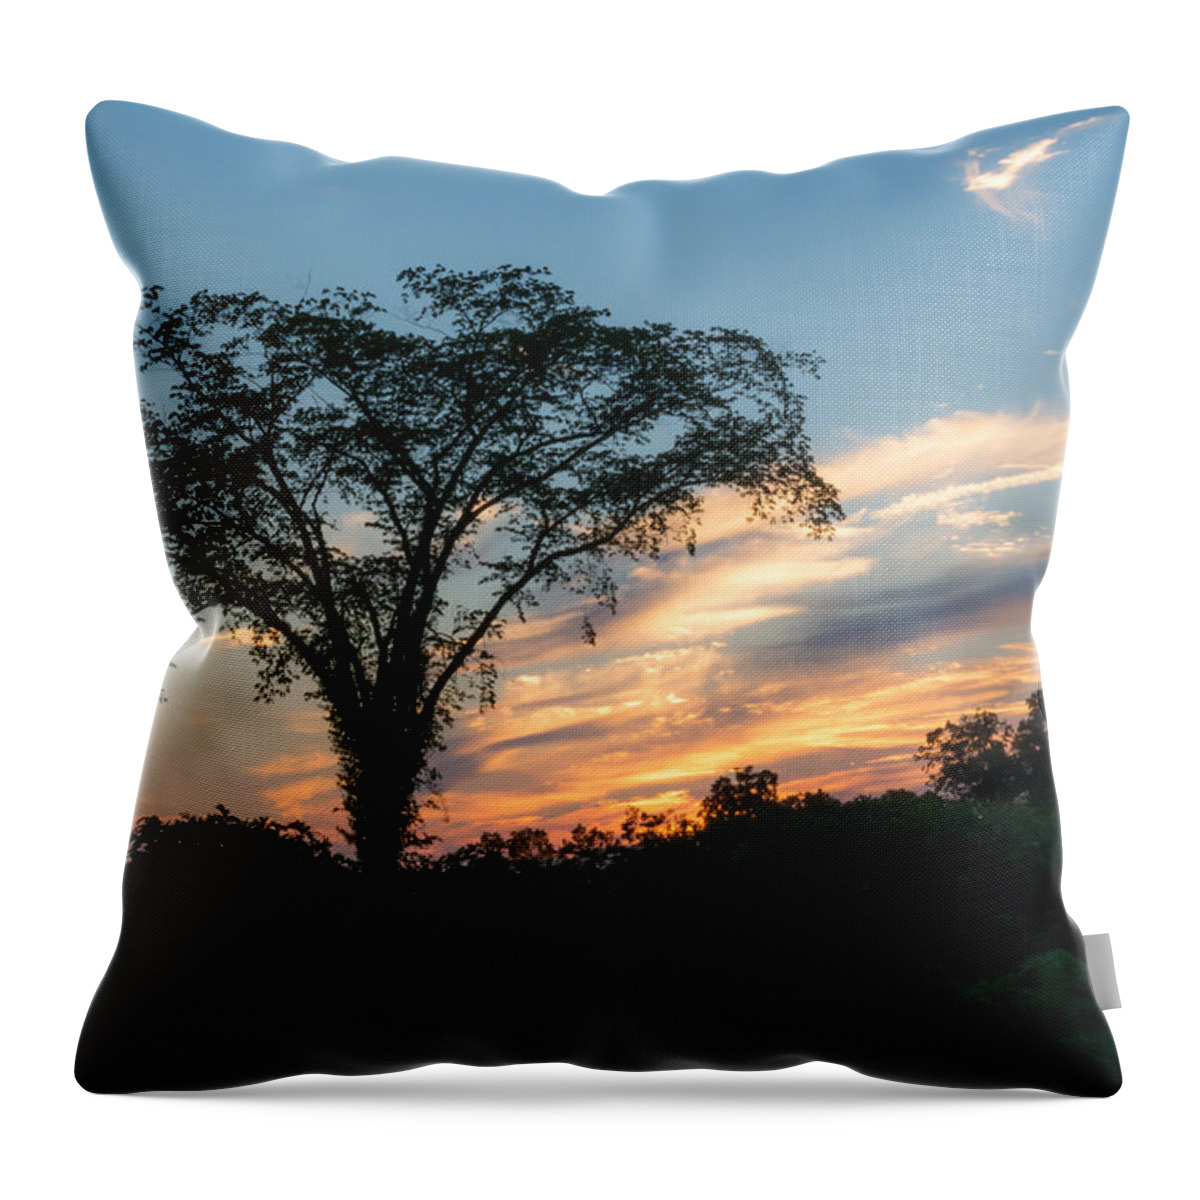 Sunset Throw Pillow featuring the photograph July Sunset by Holden The Moment